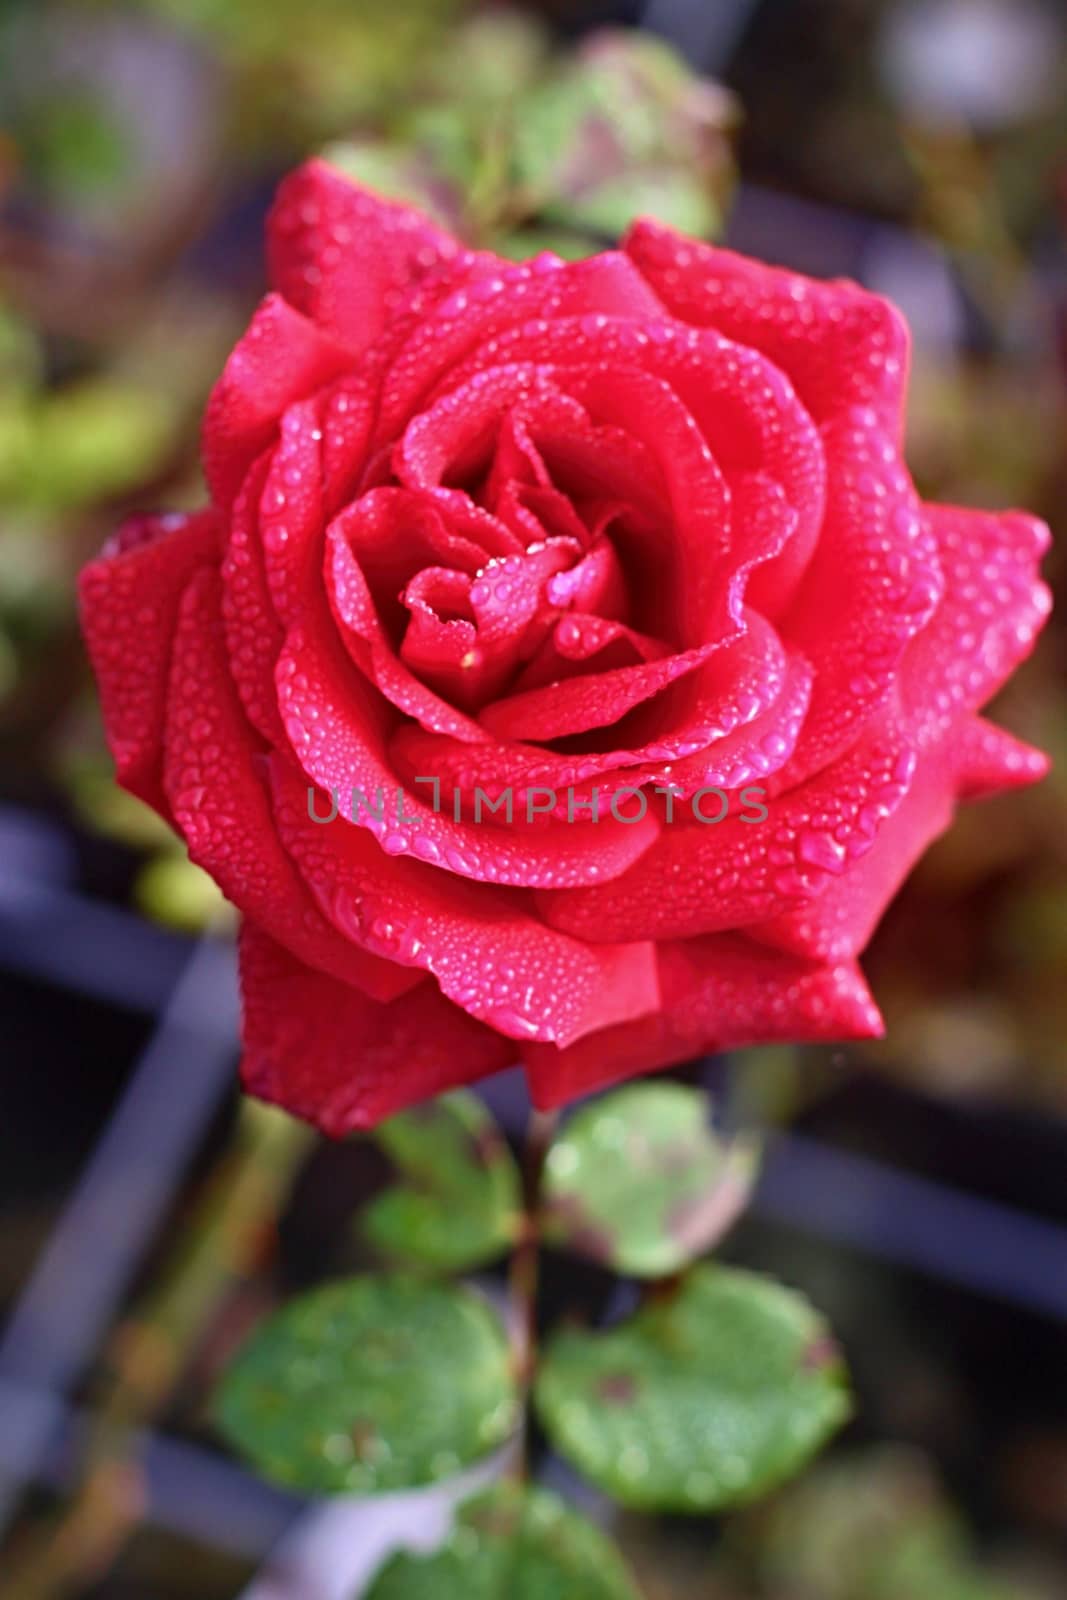 Red rose with raindrops and green leaves